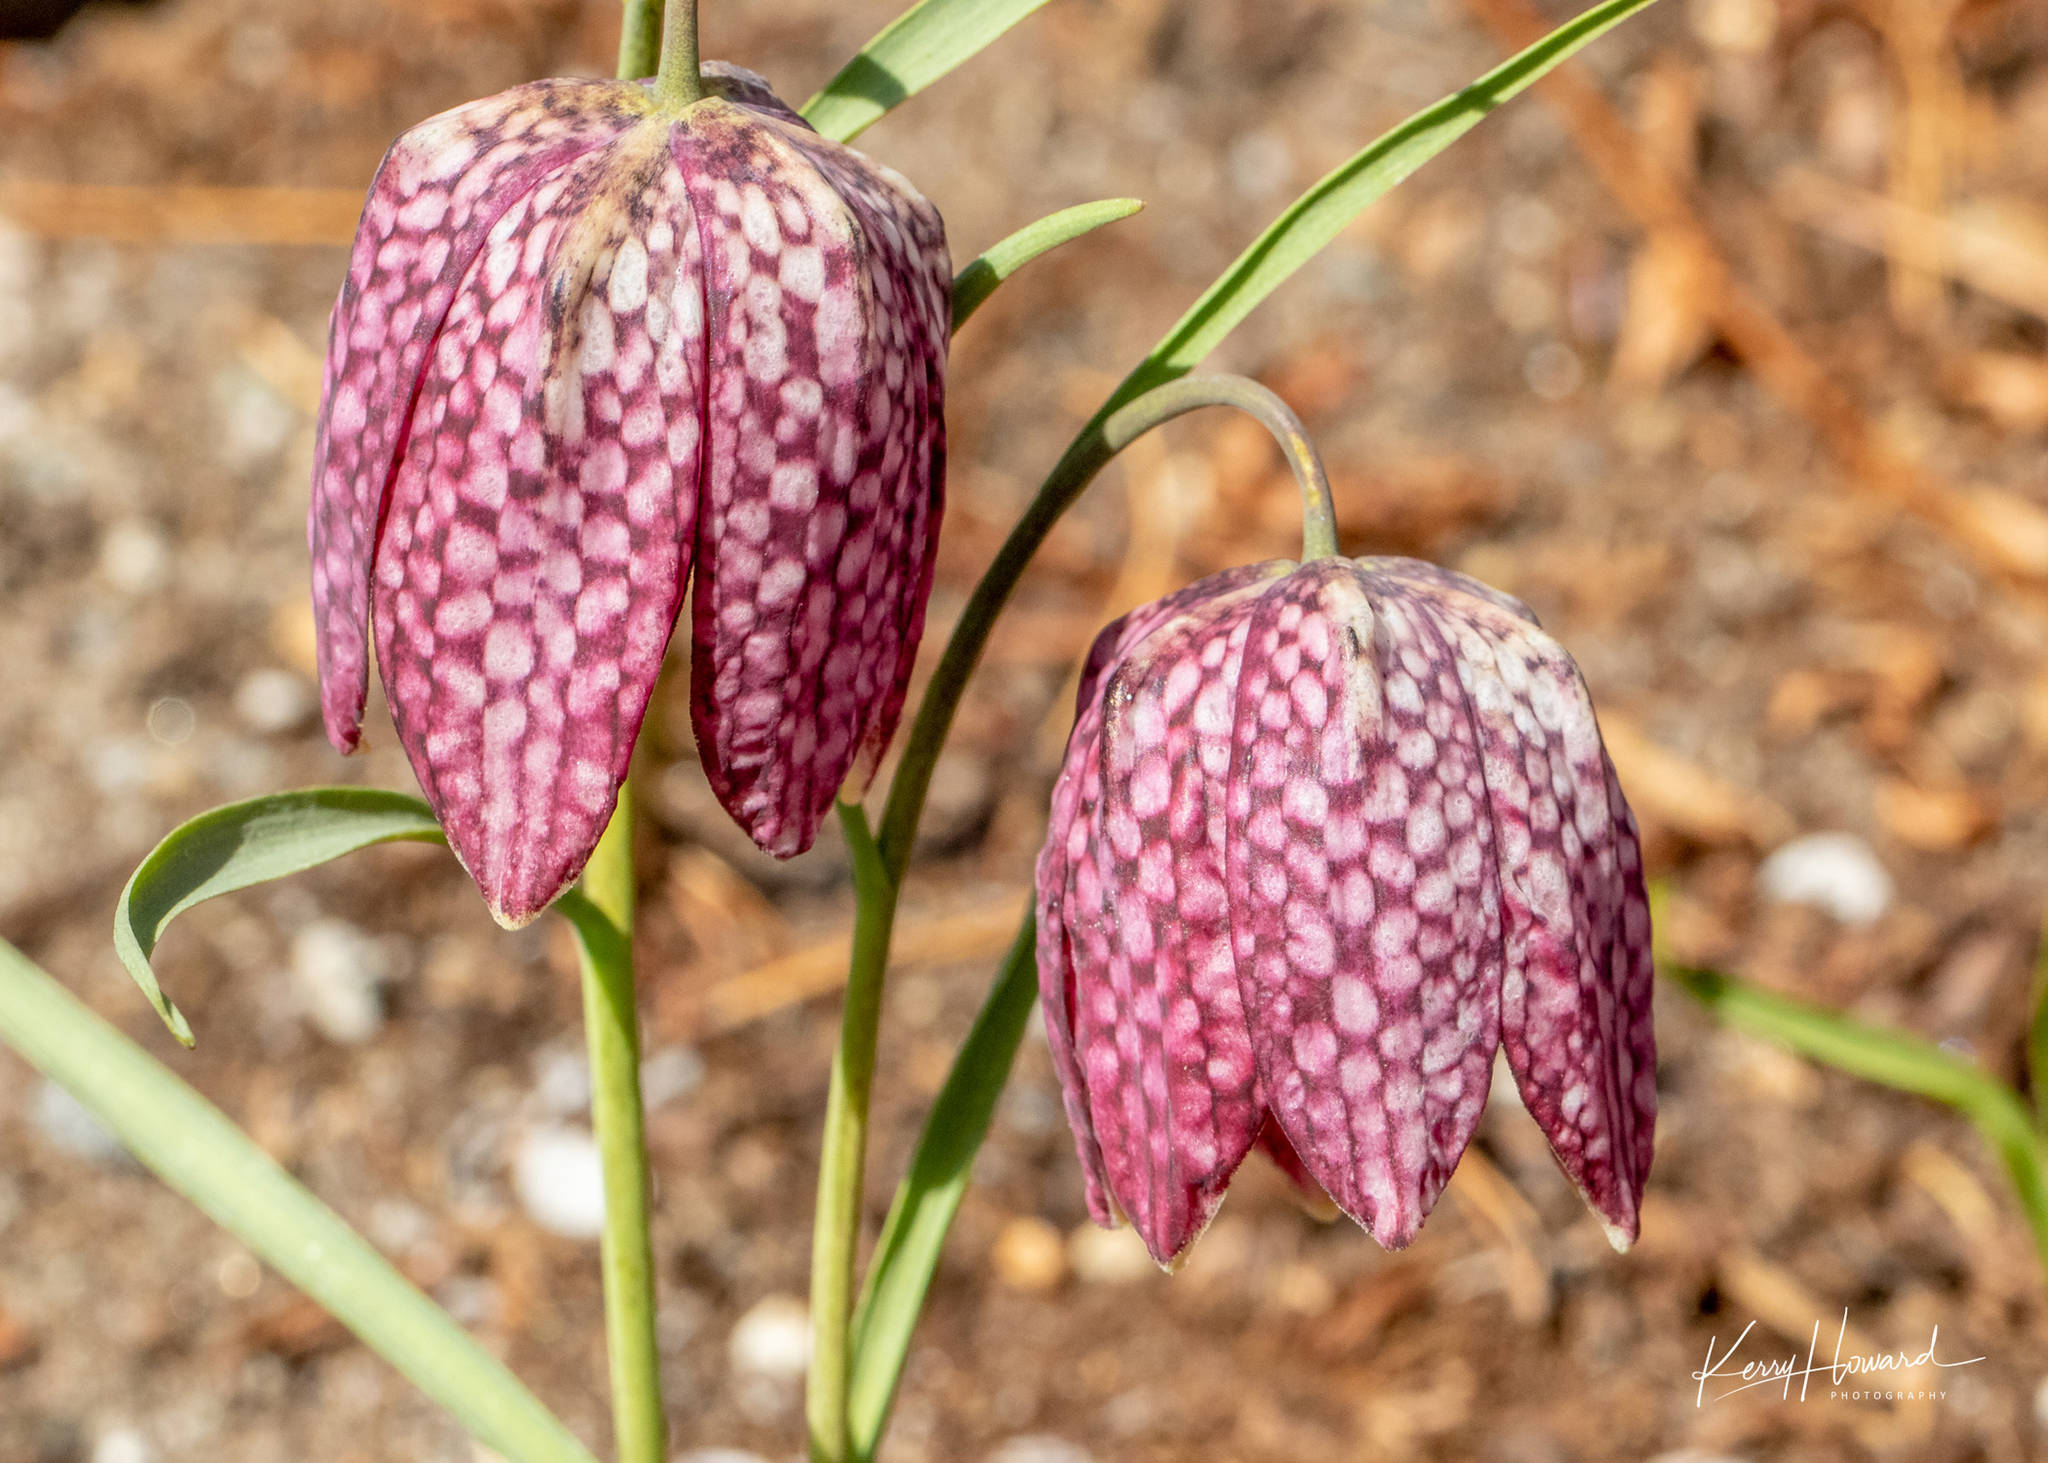 Checkerboard pattern on a fritillaria lily at Jensen-Olson Arboretum on May 1. (Courtesy Photo | Kerry Howard)